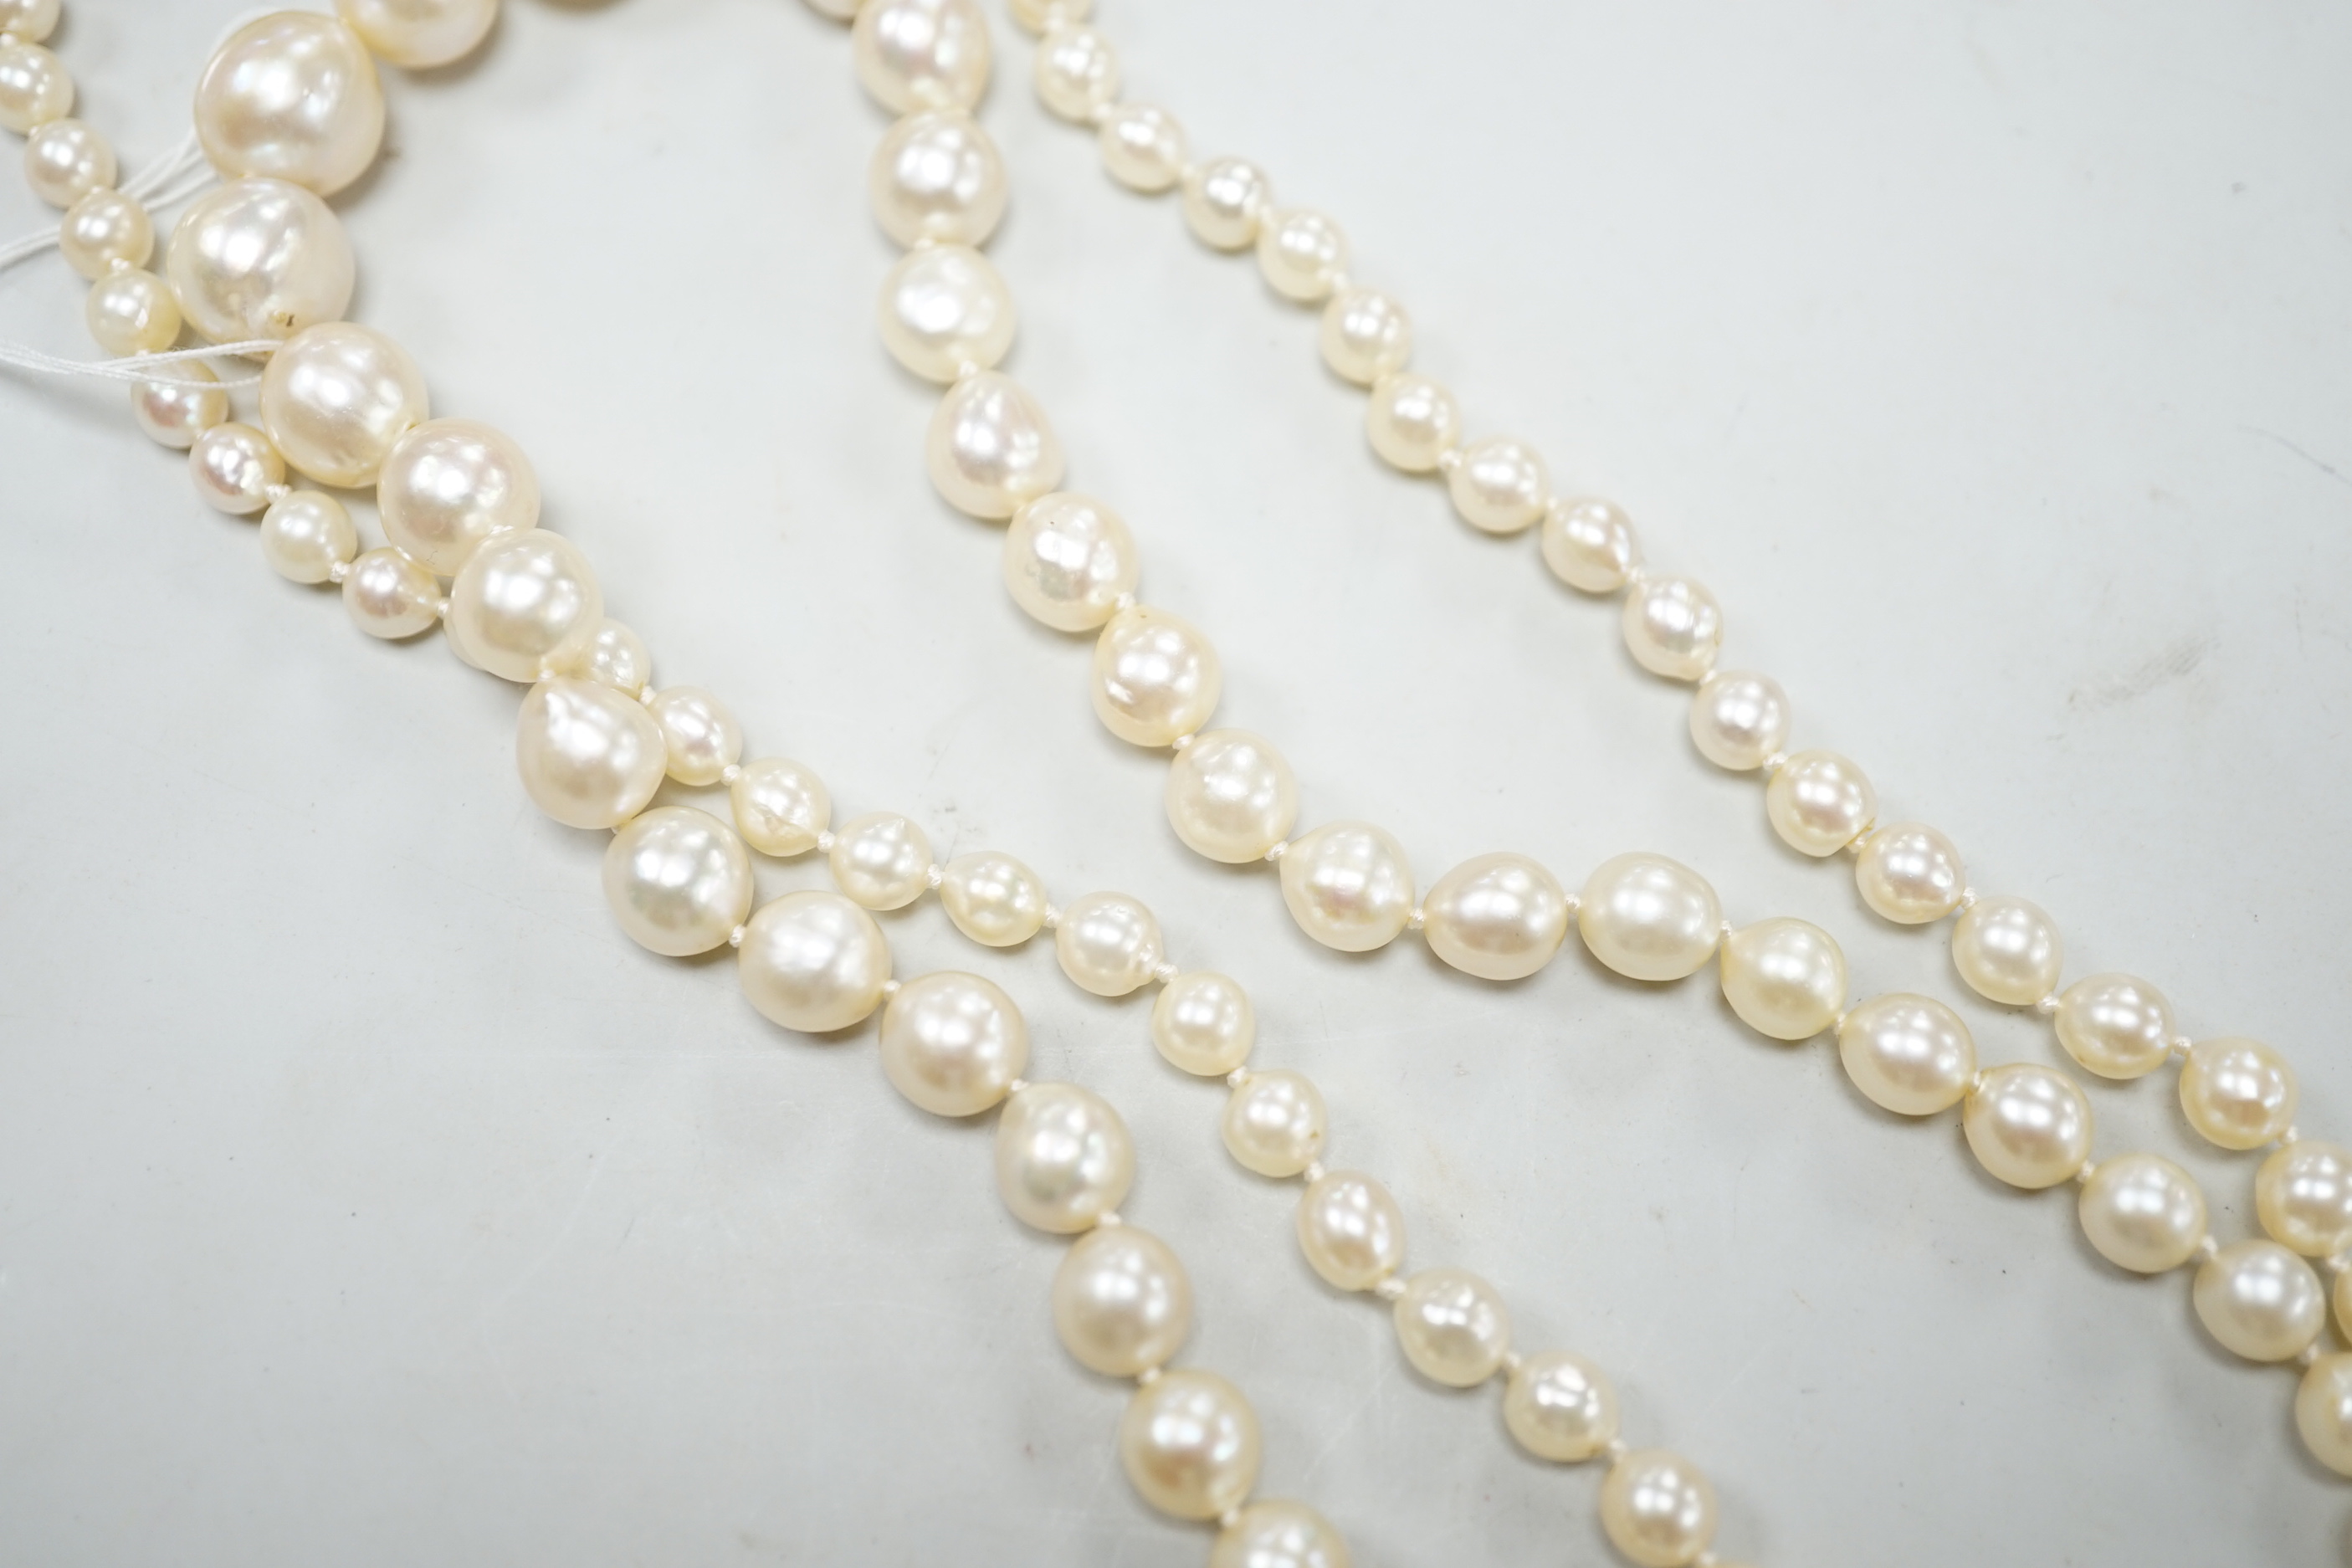 A single strand graduated cultured pearl necklace, now with an earlier 19th century seed pearl and plaited hair set clasp, 76cm, together with original clasp.